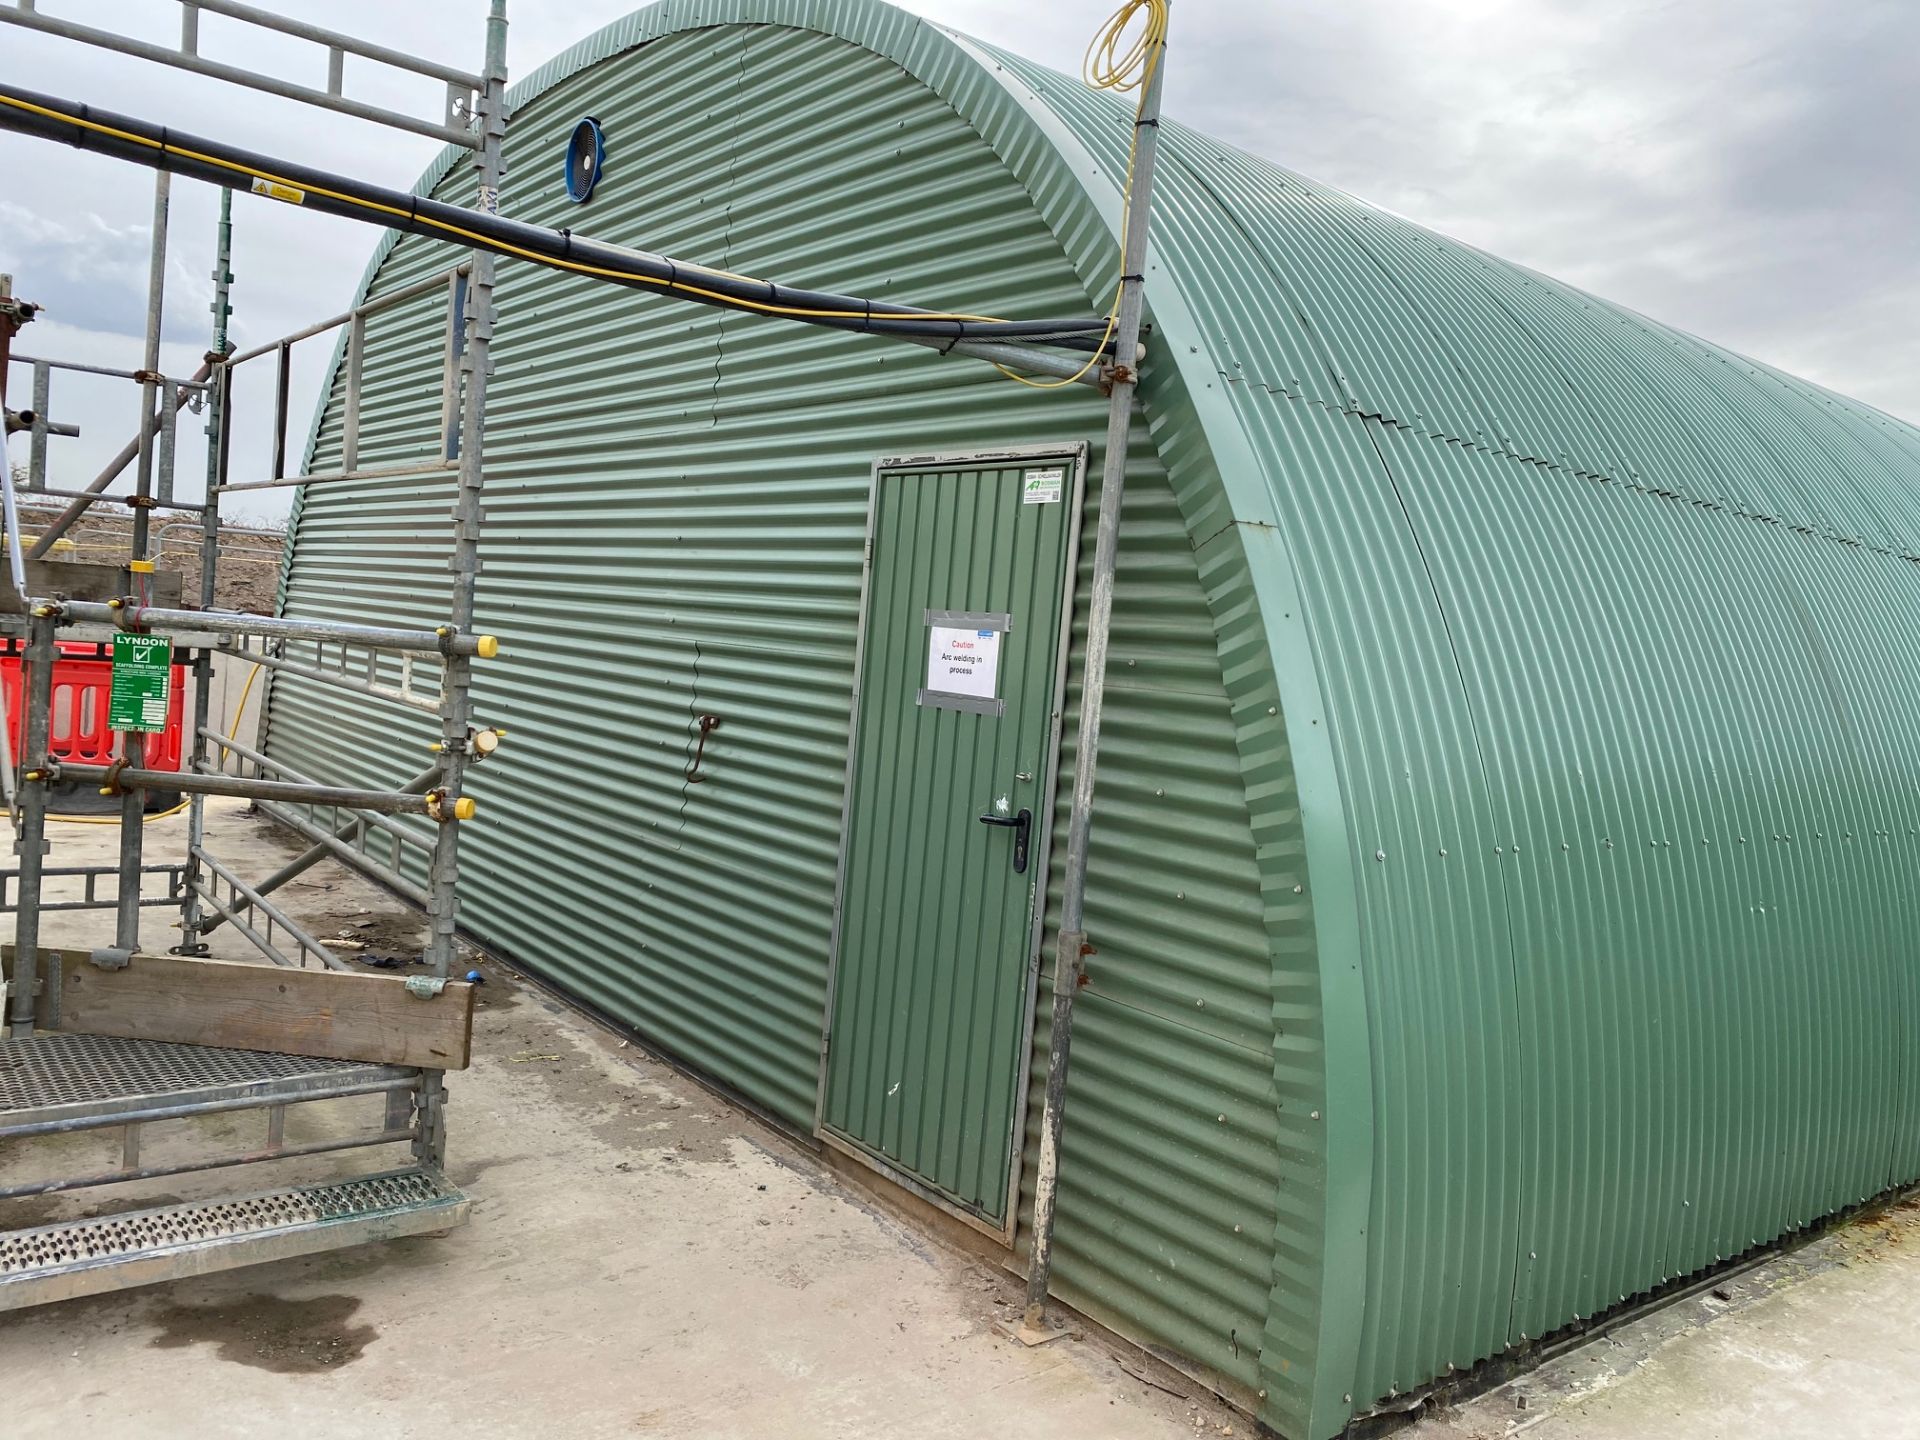 Nissen Hut, Corrugate Steel Hut with Clear Roof Panels, Double Entrance Doors One end and Single - Image 3 of 10